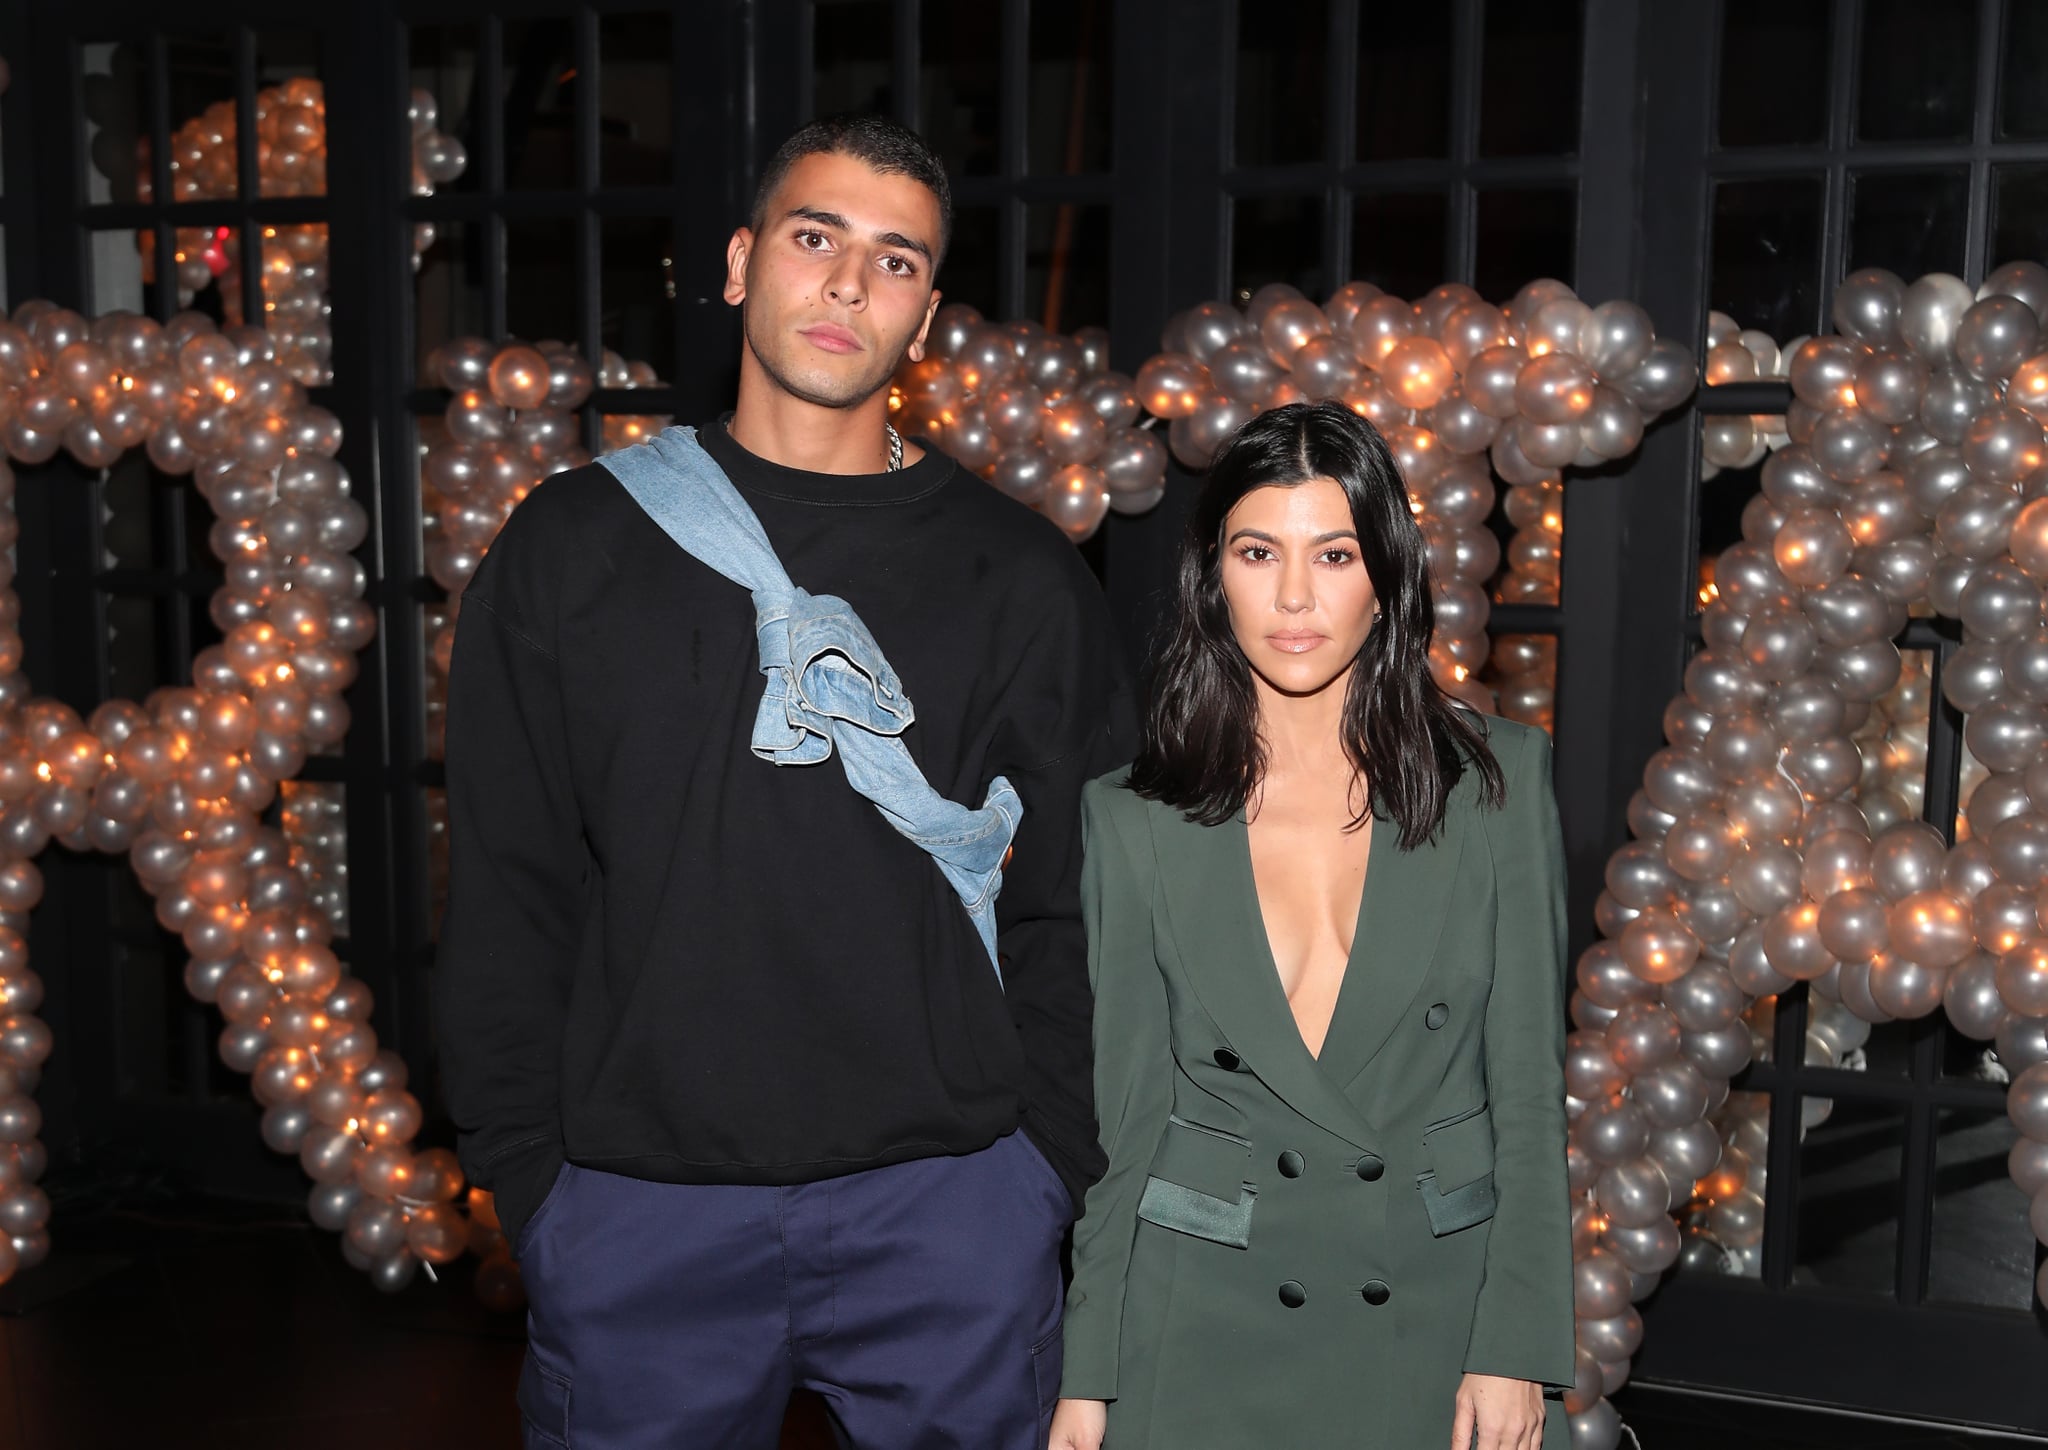 LOS ANGELES, CA - MARCH 10:  Younes Bendjima and Kourtney Kardashian pose for a photo as Remy Martin celebrates Tristan Thompson's Birthday at Beauty & Essex on March 10, 2018 in Los Angeles, California.  (Photo by Jerritt Clark/Getty Images for Remy Martin )